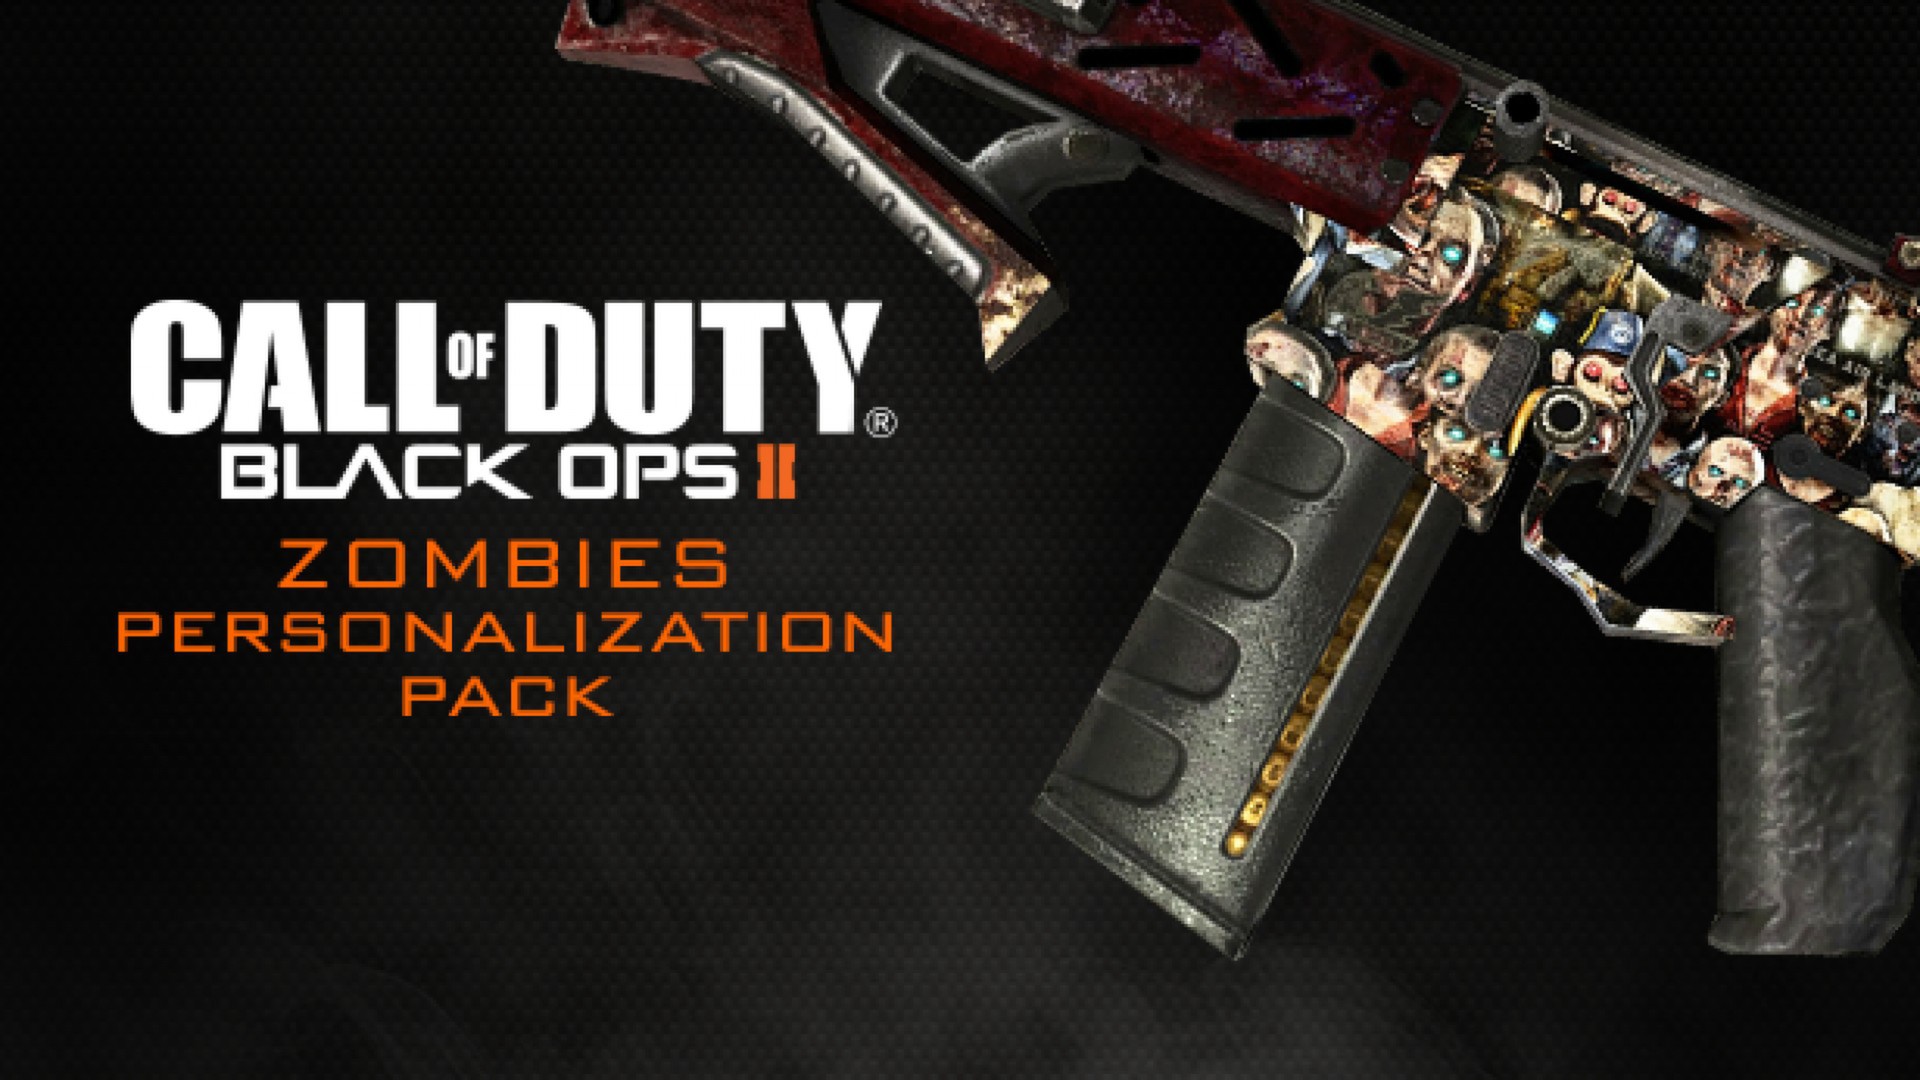 Call of duty black ops 2 zombies trainer mrantifun hearts